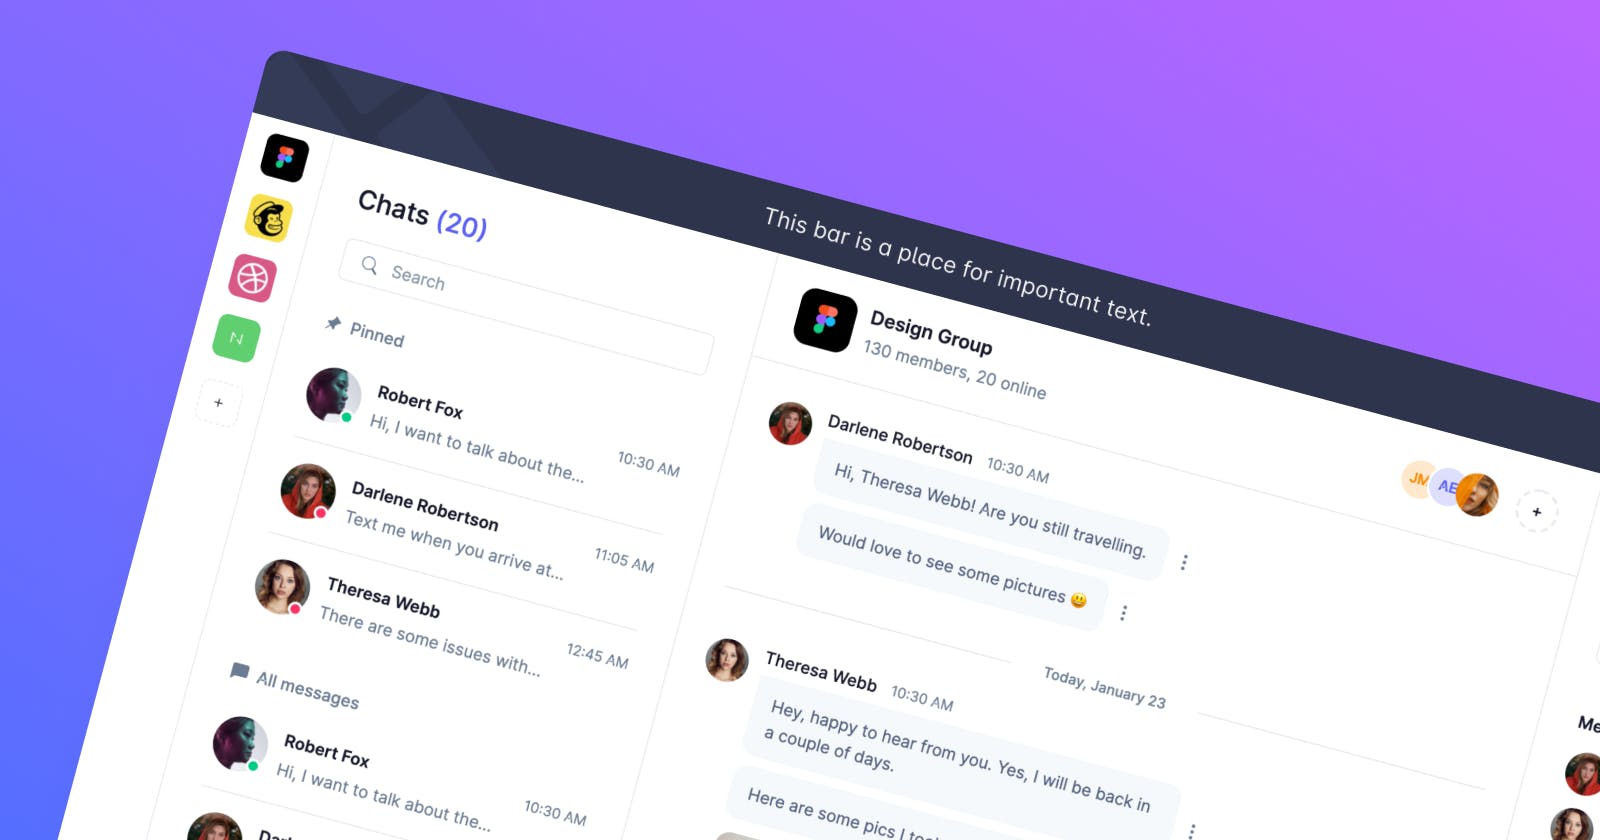 5+ Bootstrap chat templates for building modern messaging user interfaces